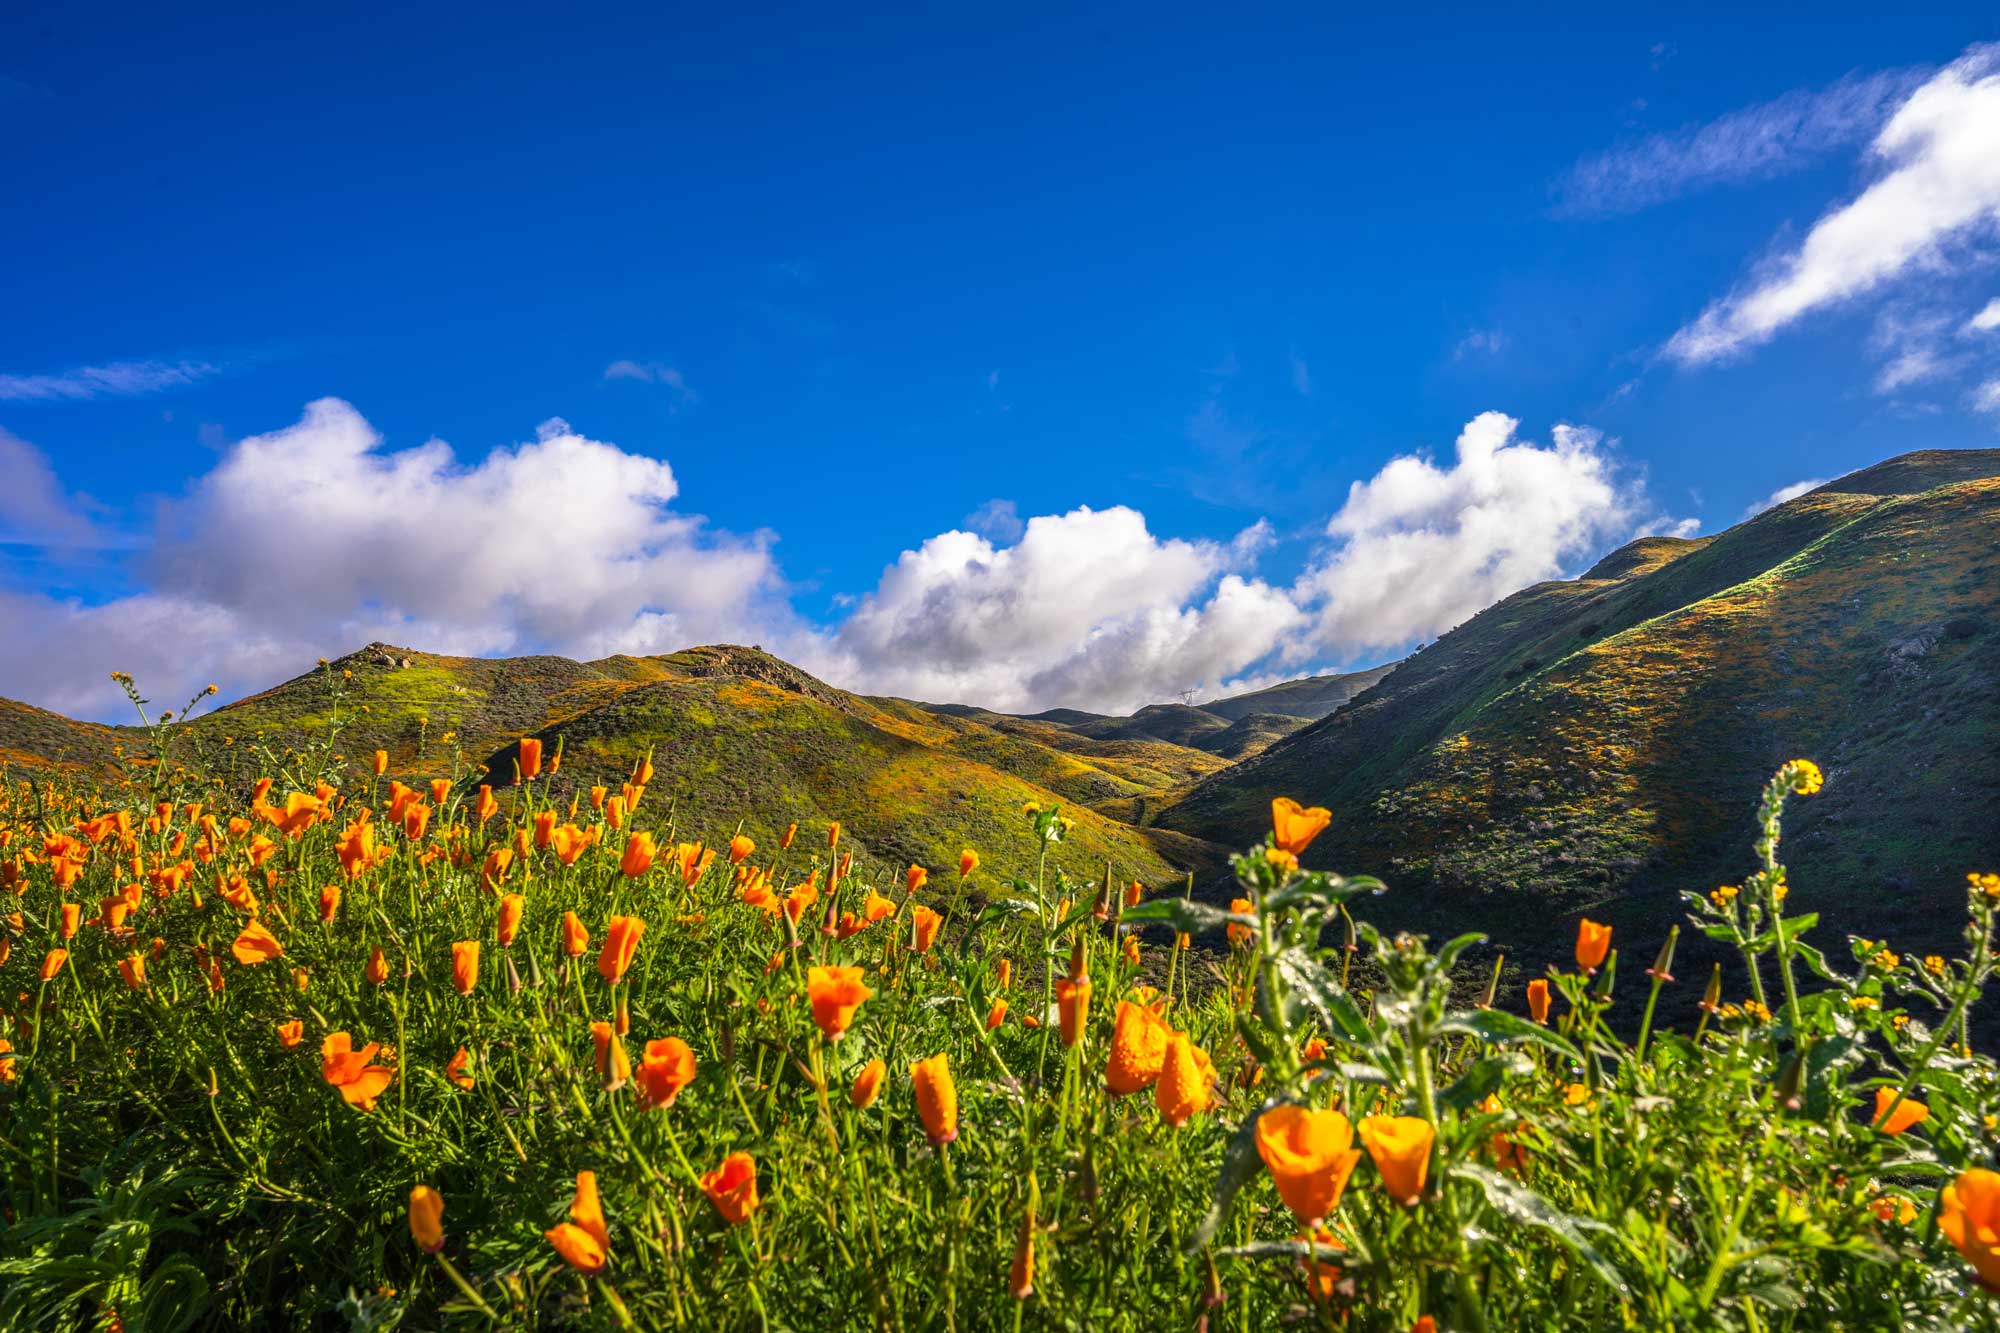 photo - Blooming Poppies with Hills in Background at Lake Elsinor, California